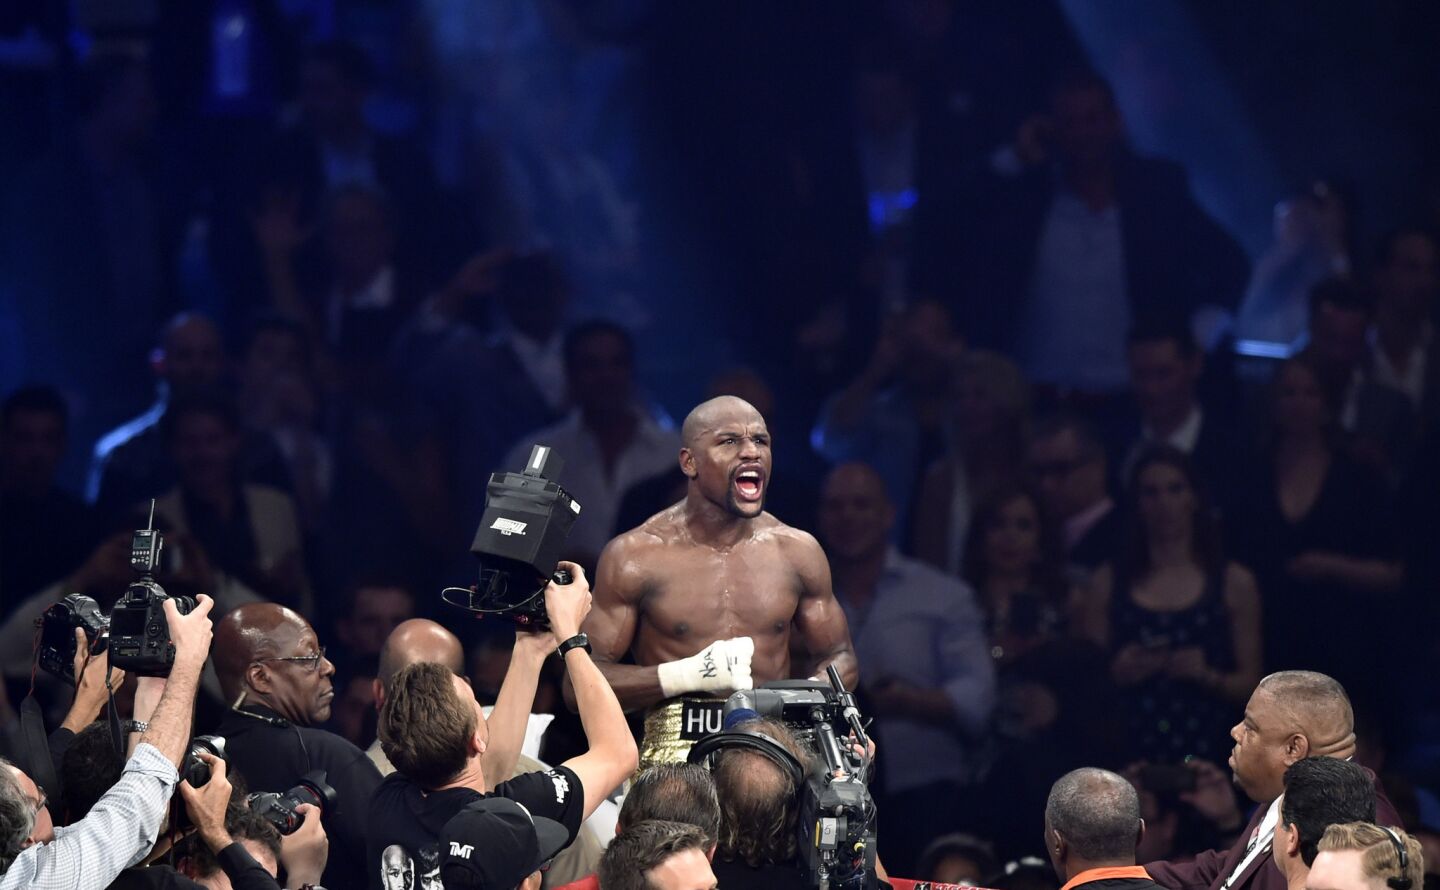 Floyd Mayweather Jr. enjoys the moment after beating Manny Pacquiao.